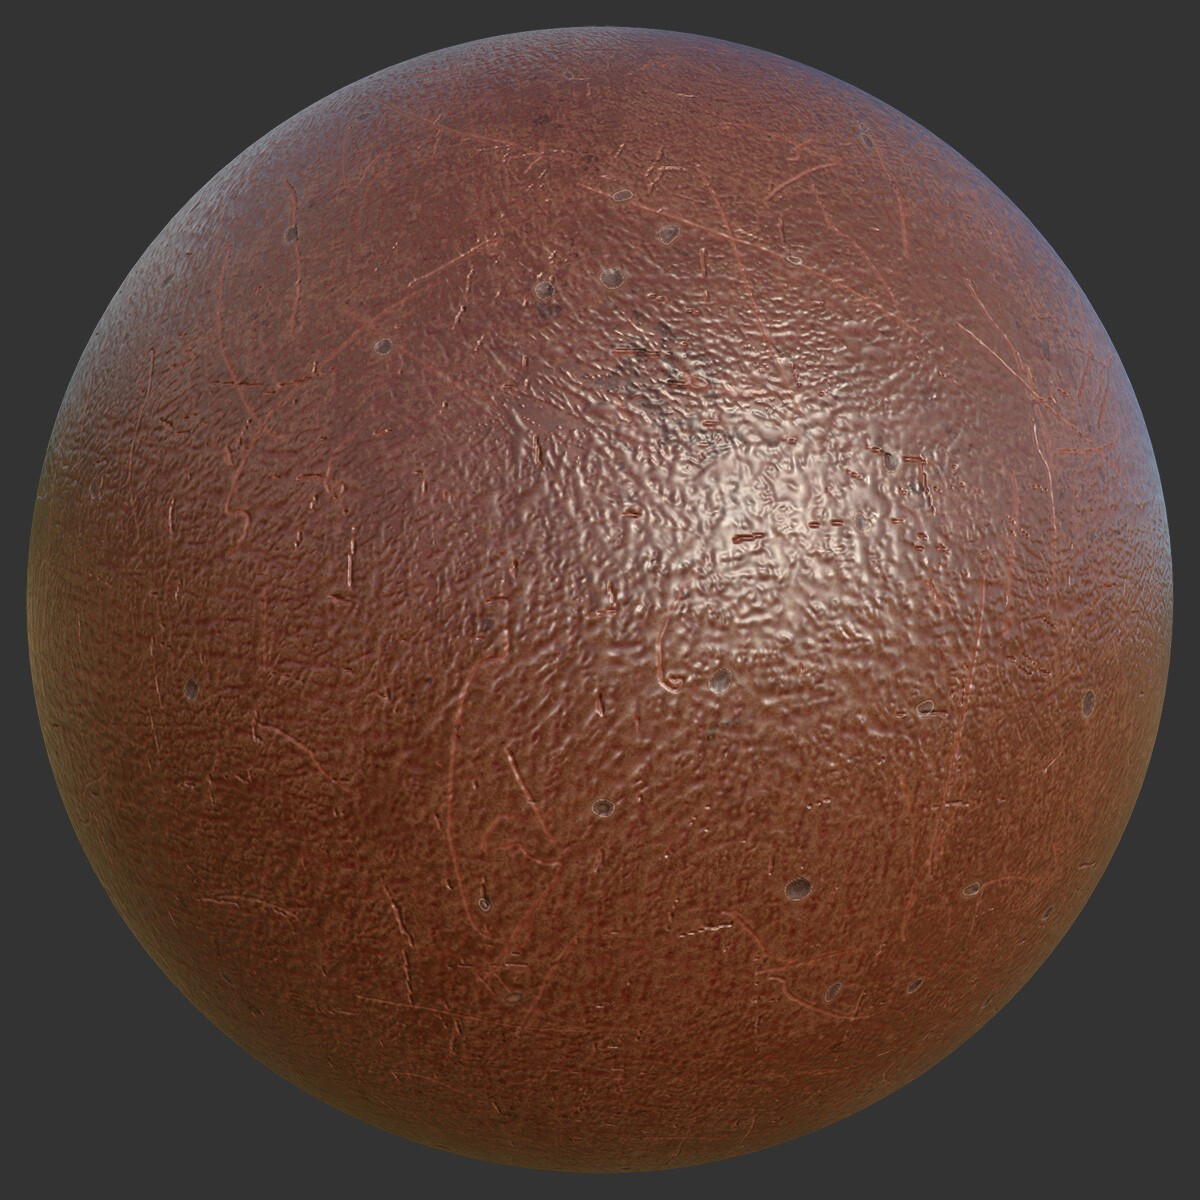 Worn Brown Leather Texture with Scratches and Dents, Free PBR